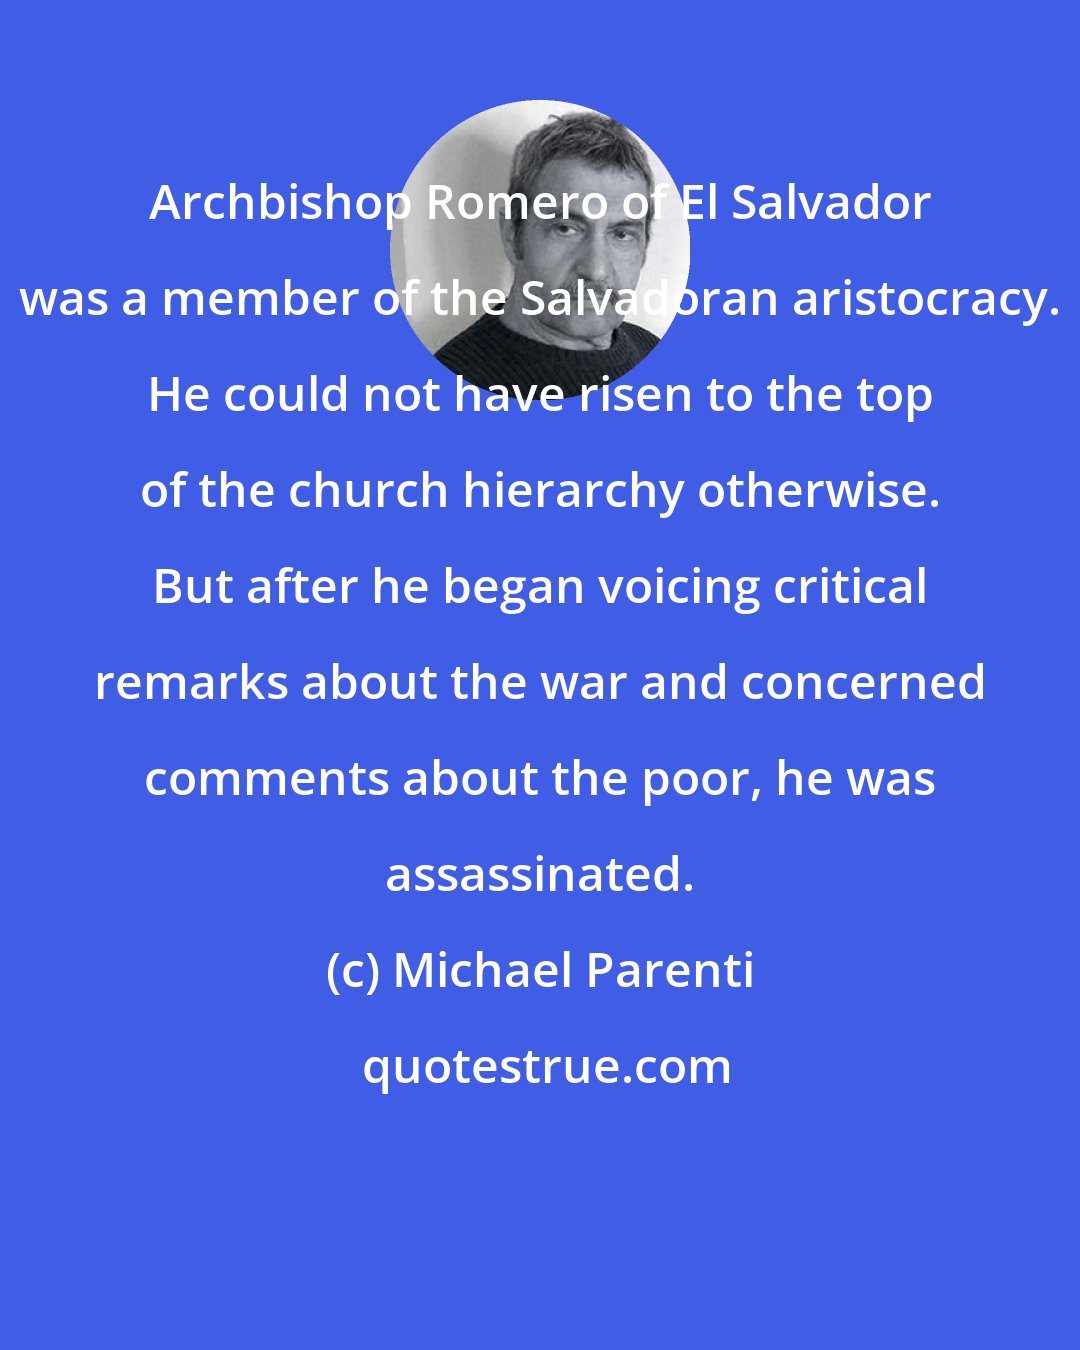 Michael Parenti: Archbishop Romero of El Salvador was a member of the Salvadoran aristocracy. He could not have risen to the top of the church hierarchy otherwise. But after he began voicing critical remarks about the war and concerned comments about the poor, he was assassinated.